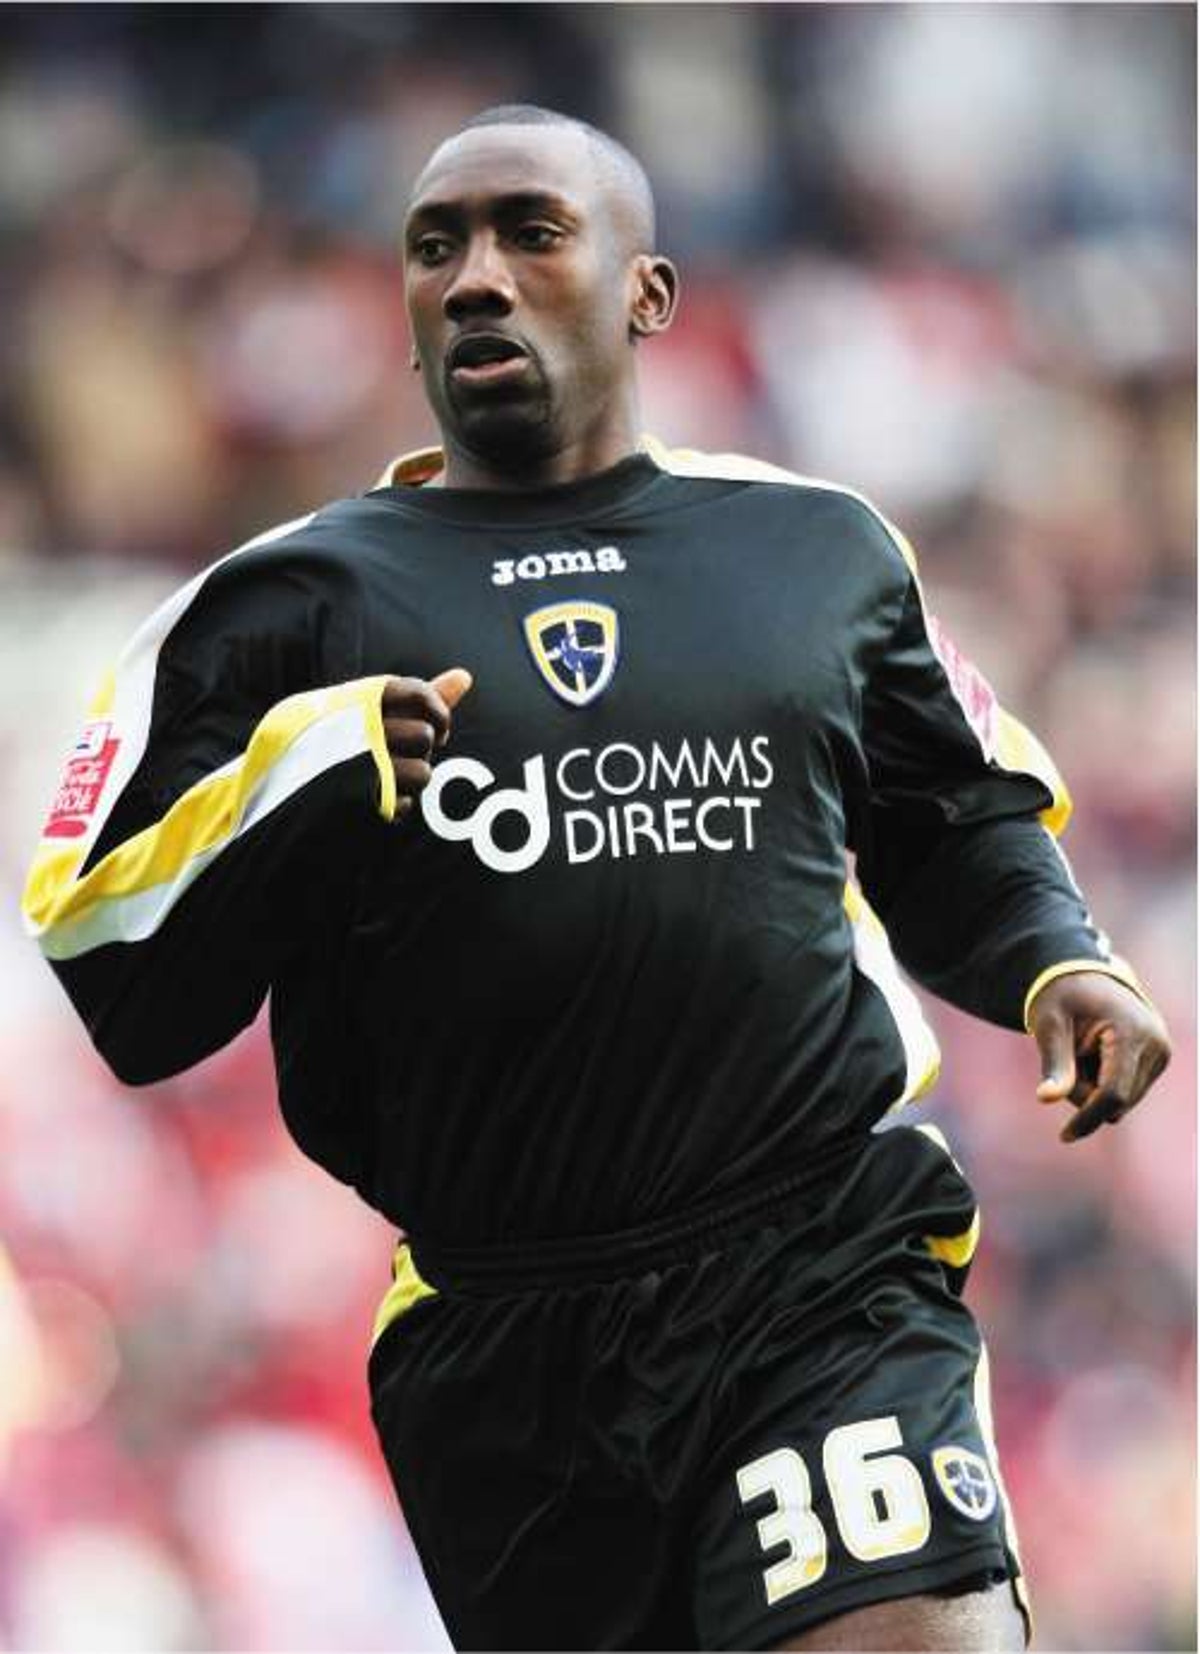 When did Jimmy Floyd Hasselbaink retire and where is he now?